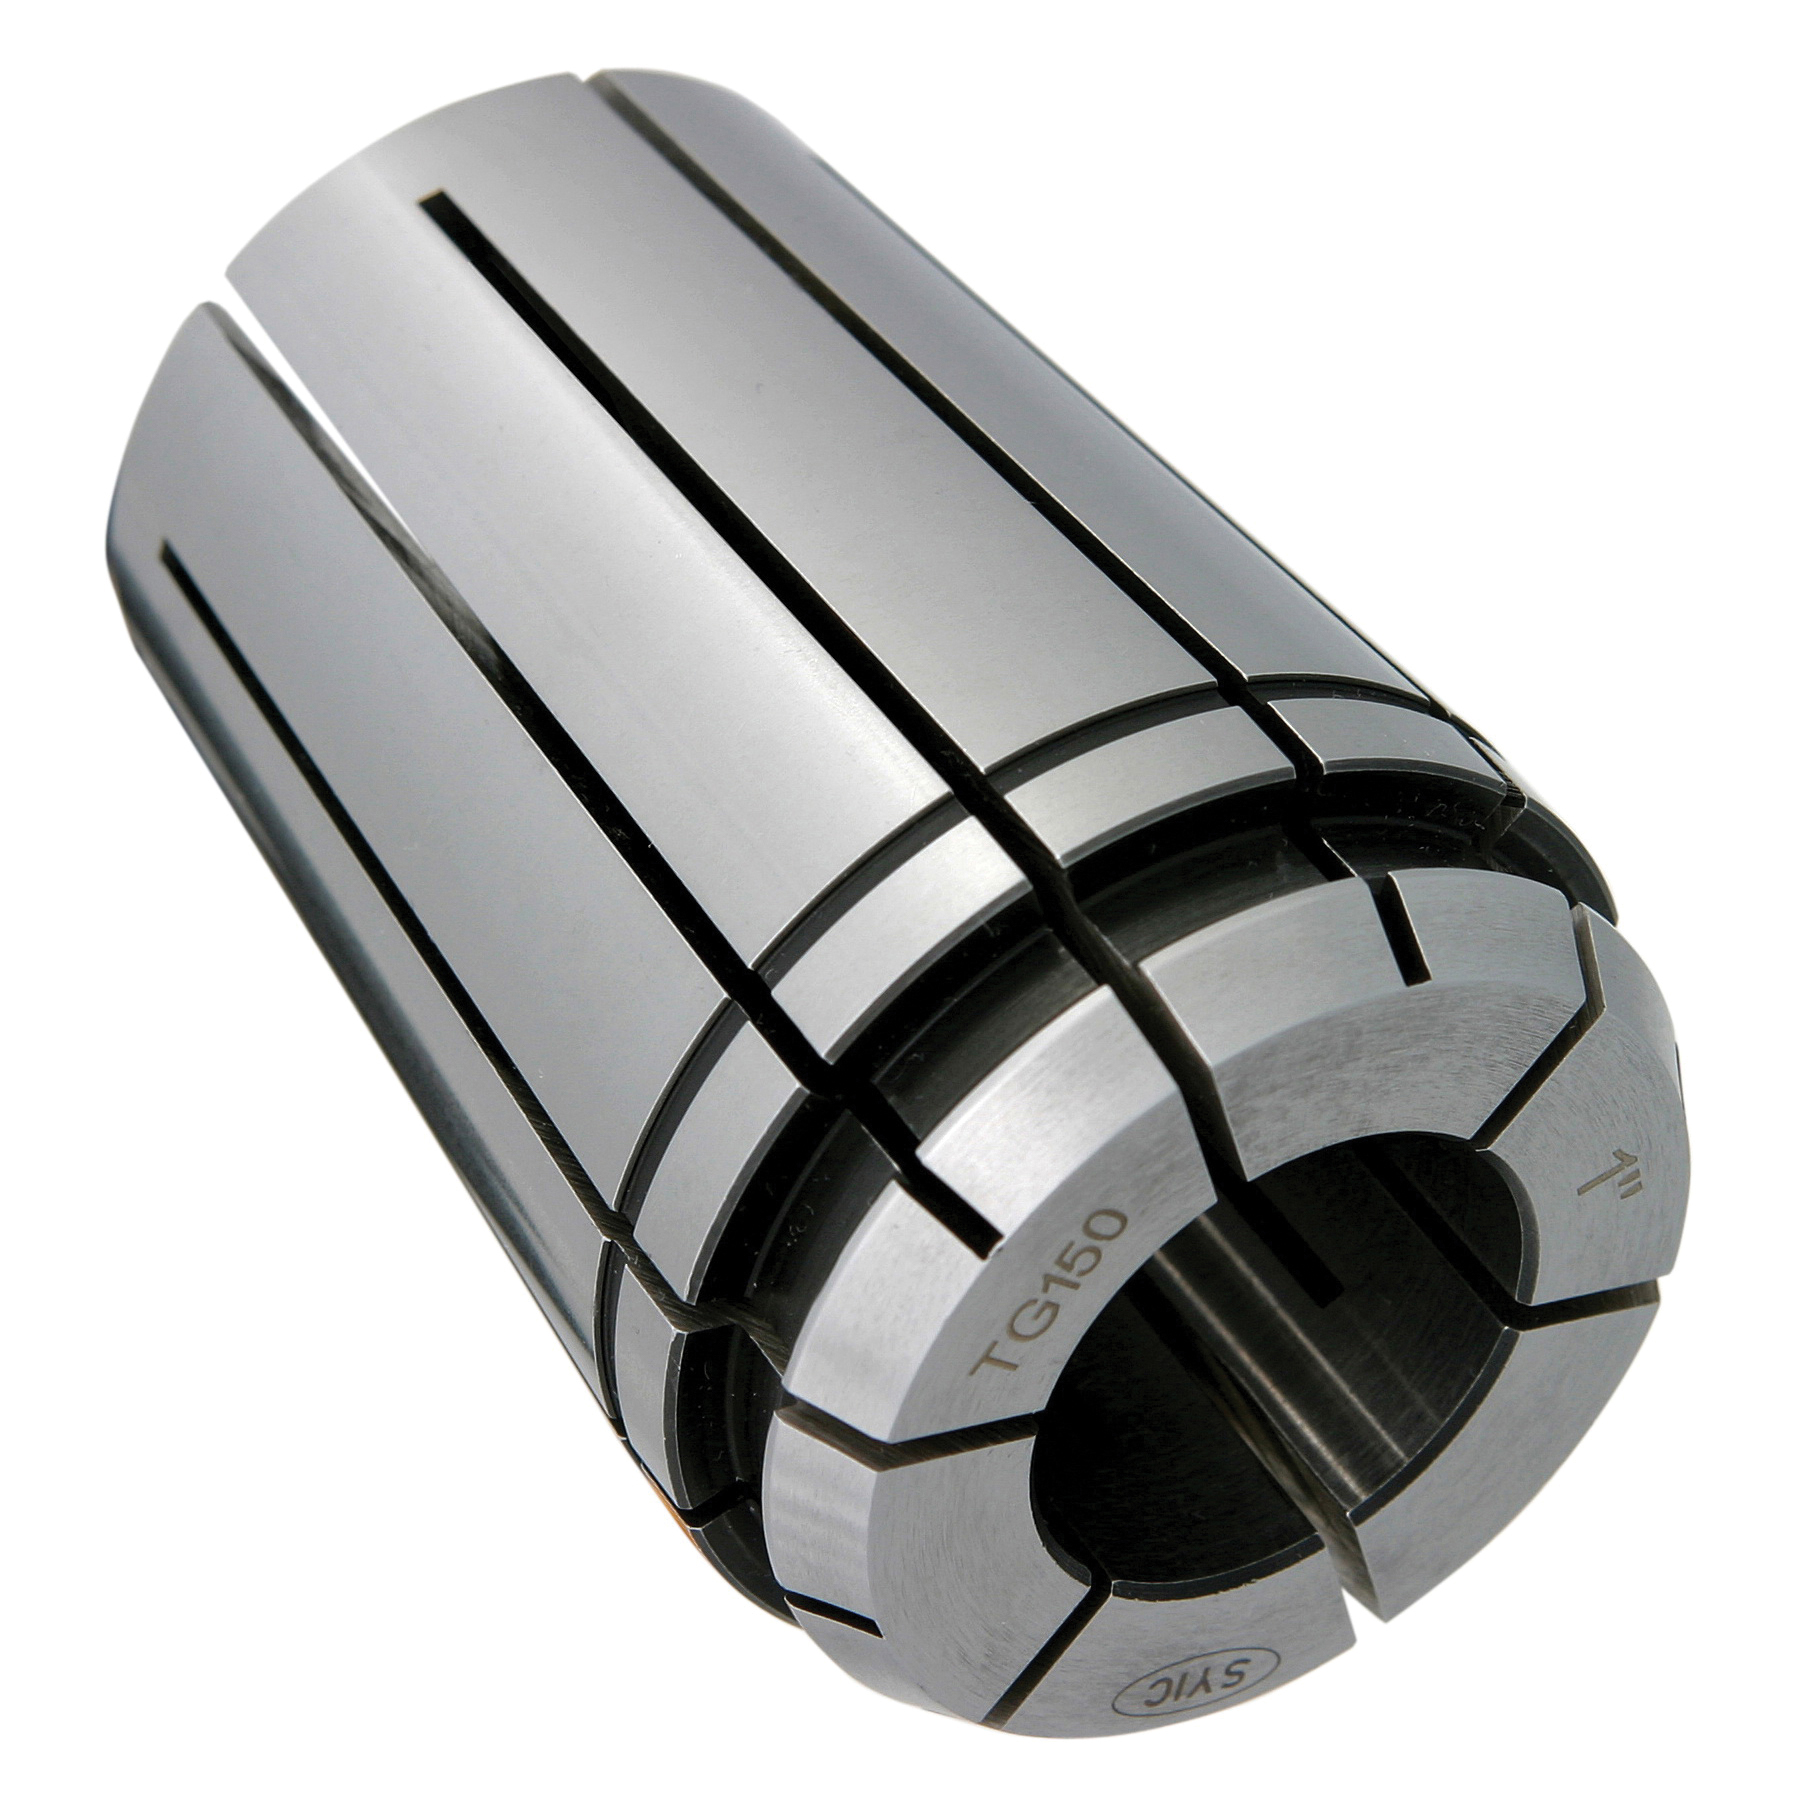 TG150 29/32" COLLET